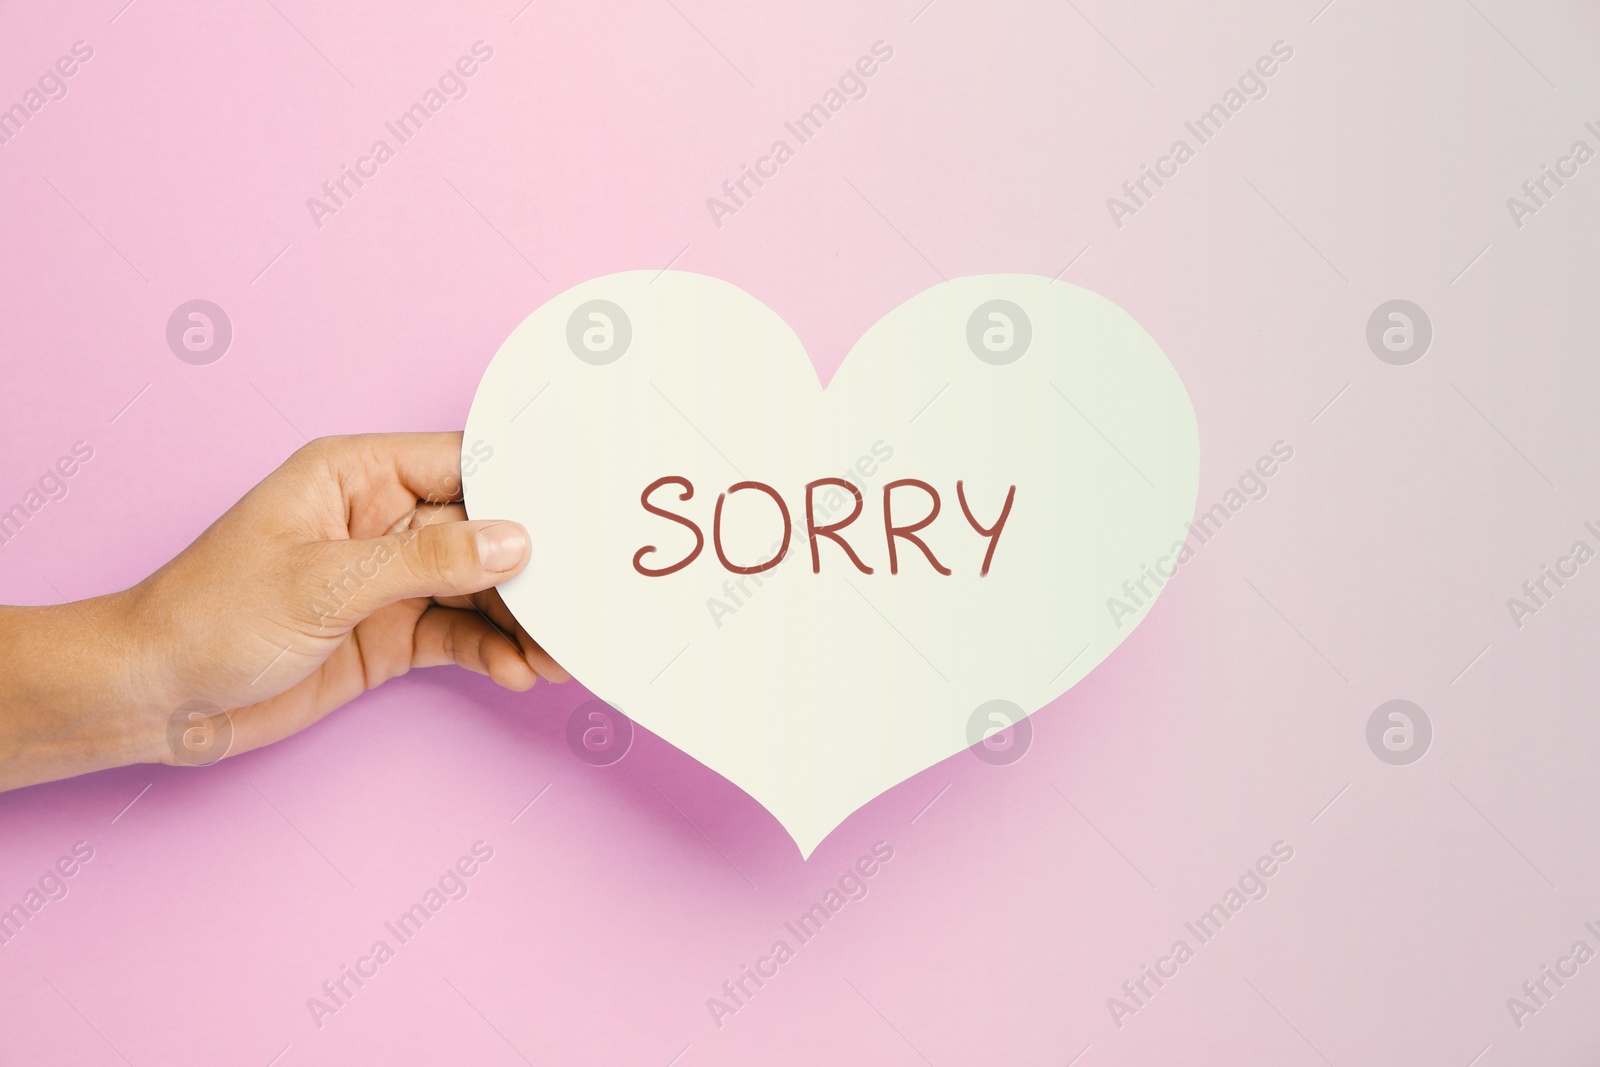 Image of Apology. Woman holding paper heart with word Sorry on pink background, closeup